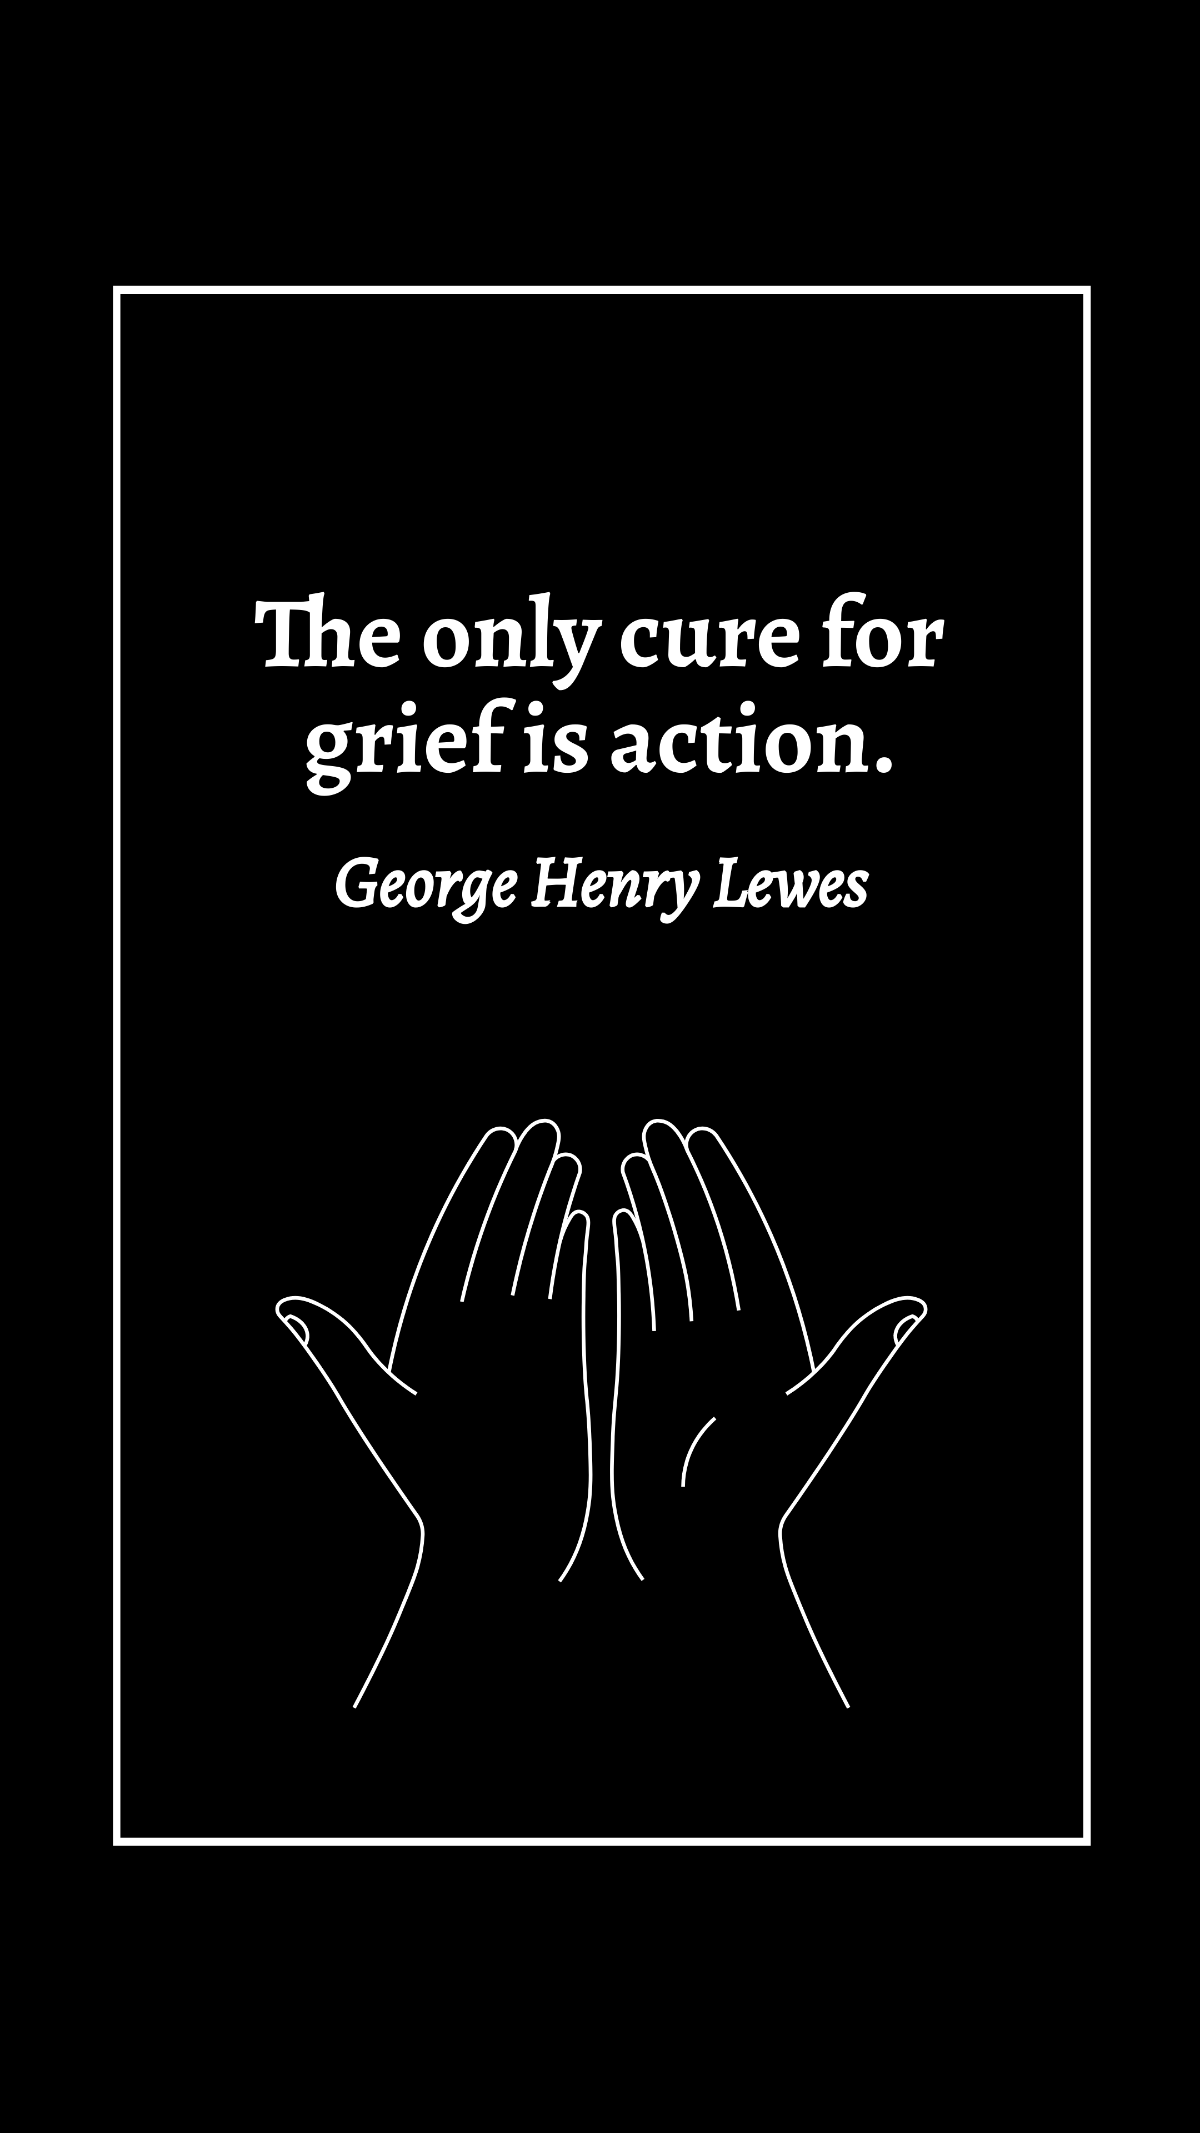 Free George Henry Lewes - The only cure for grief is action. Template